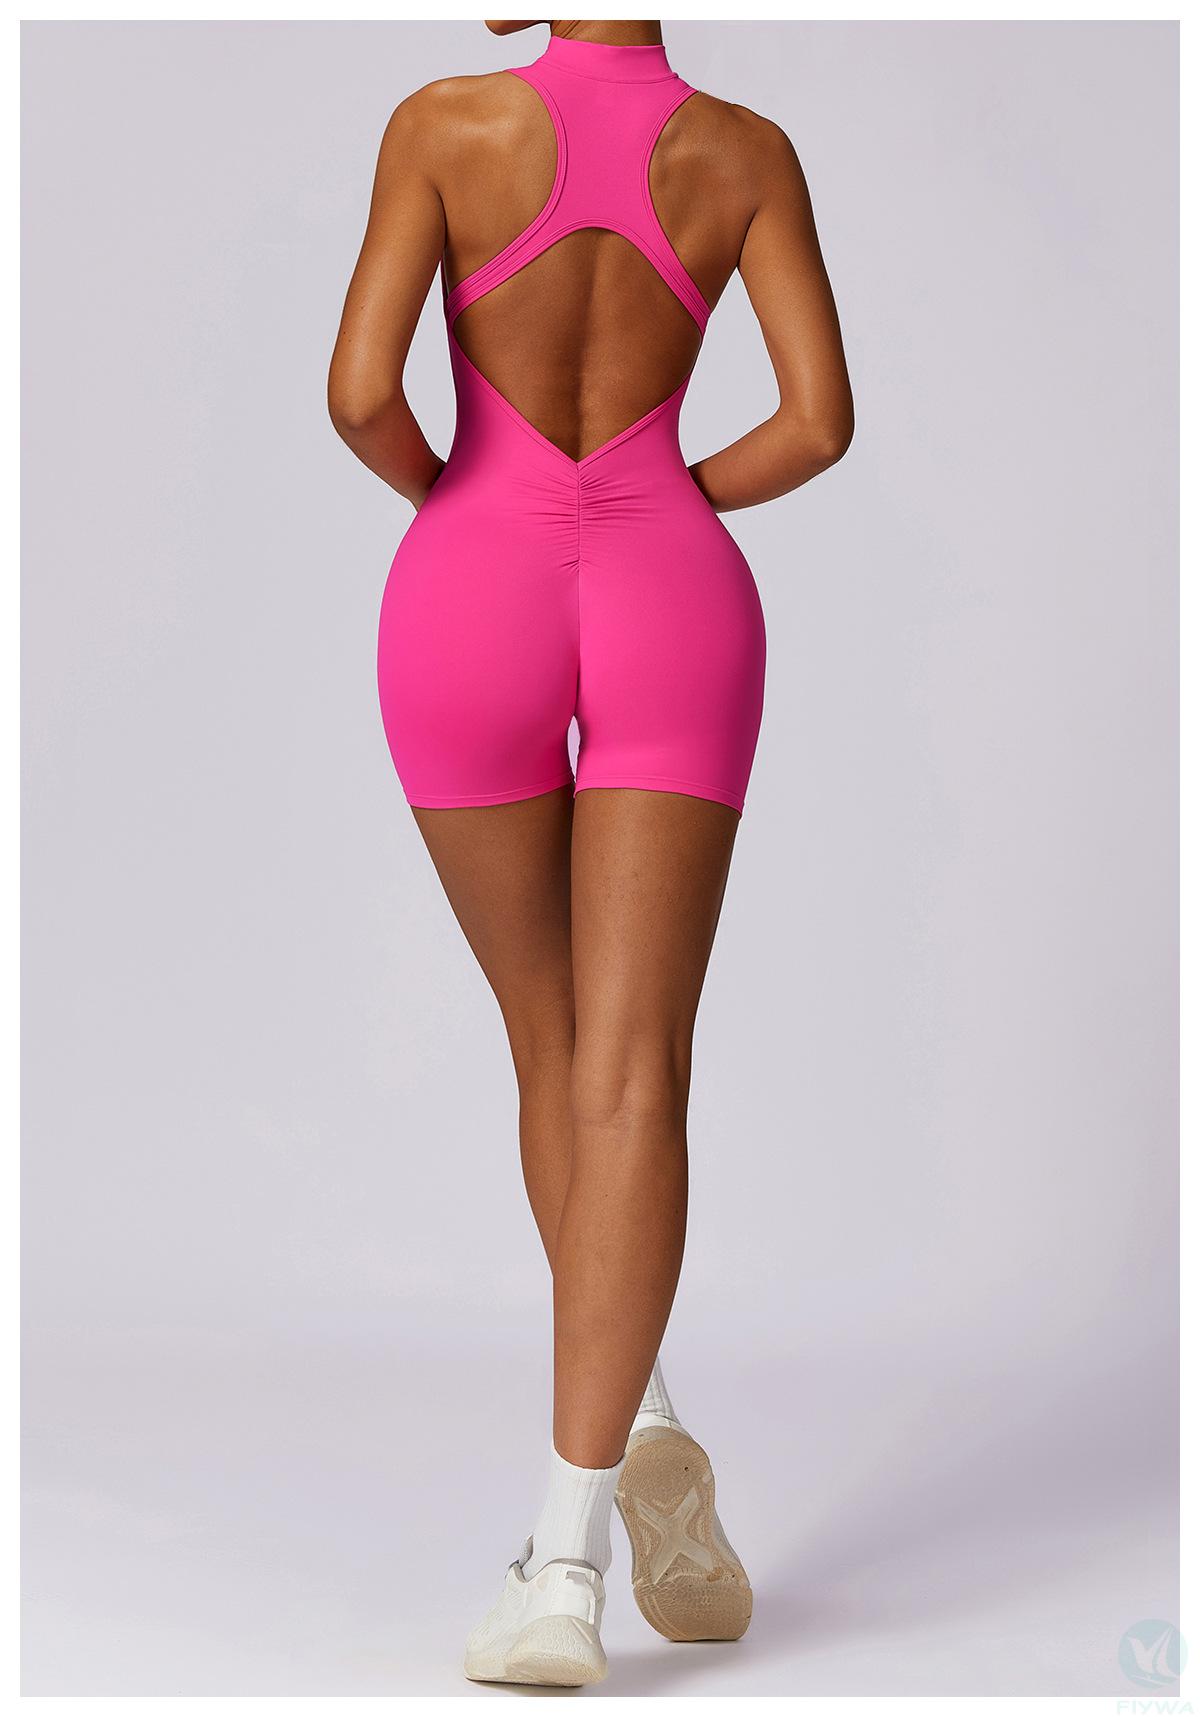 Spring high-intensity sports back-beautiful yoga jumpsuit zipper nude tight one-piece fitness suitFLY-LT-008